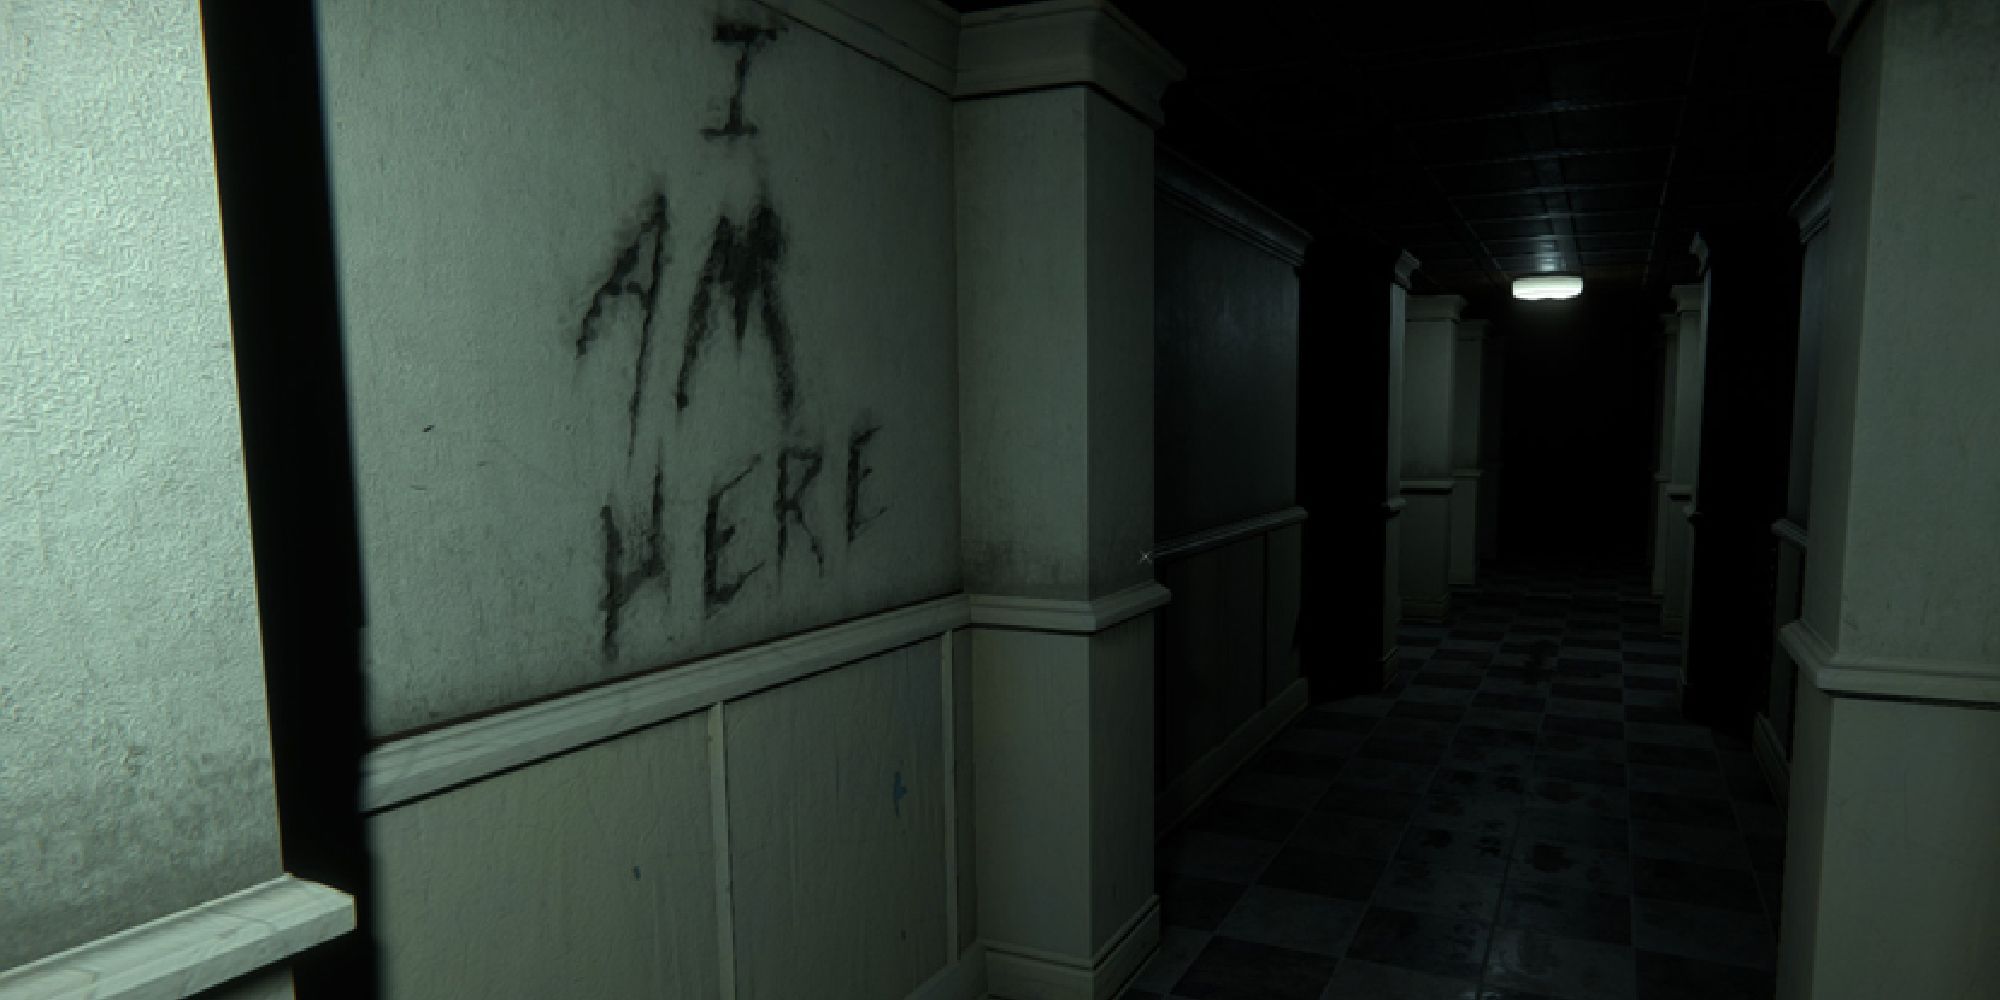 One of the dark and creepy corridors of the morgue, on the wall of which is written 